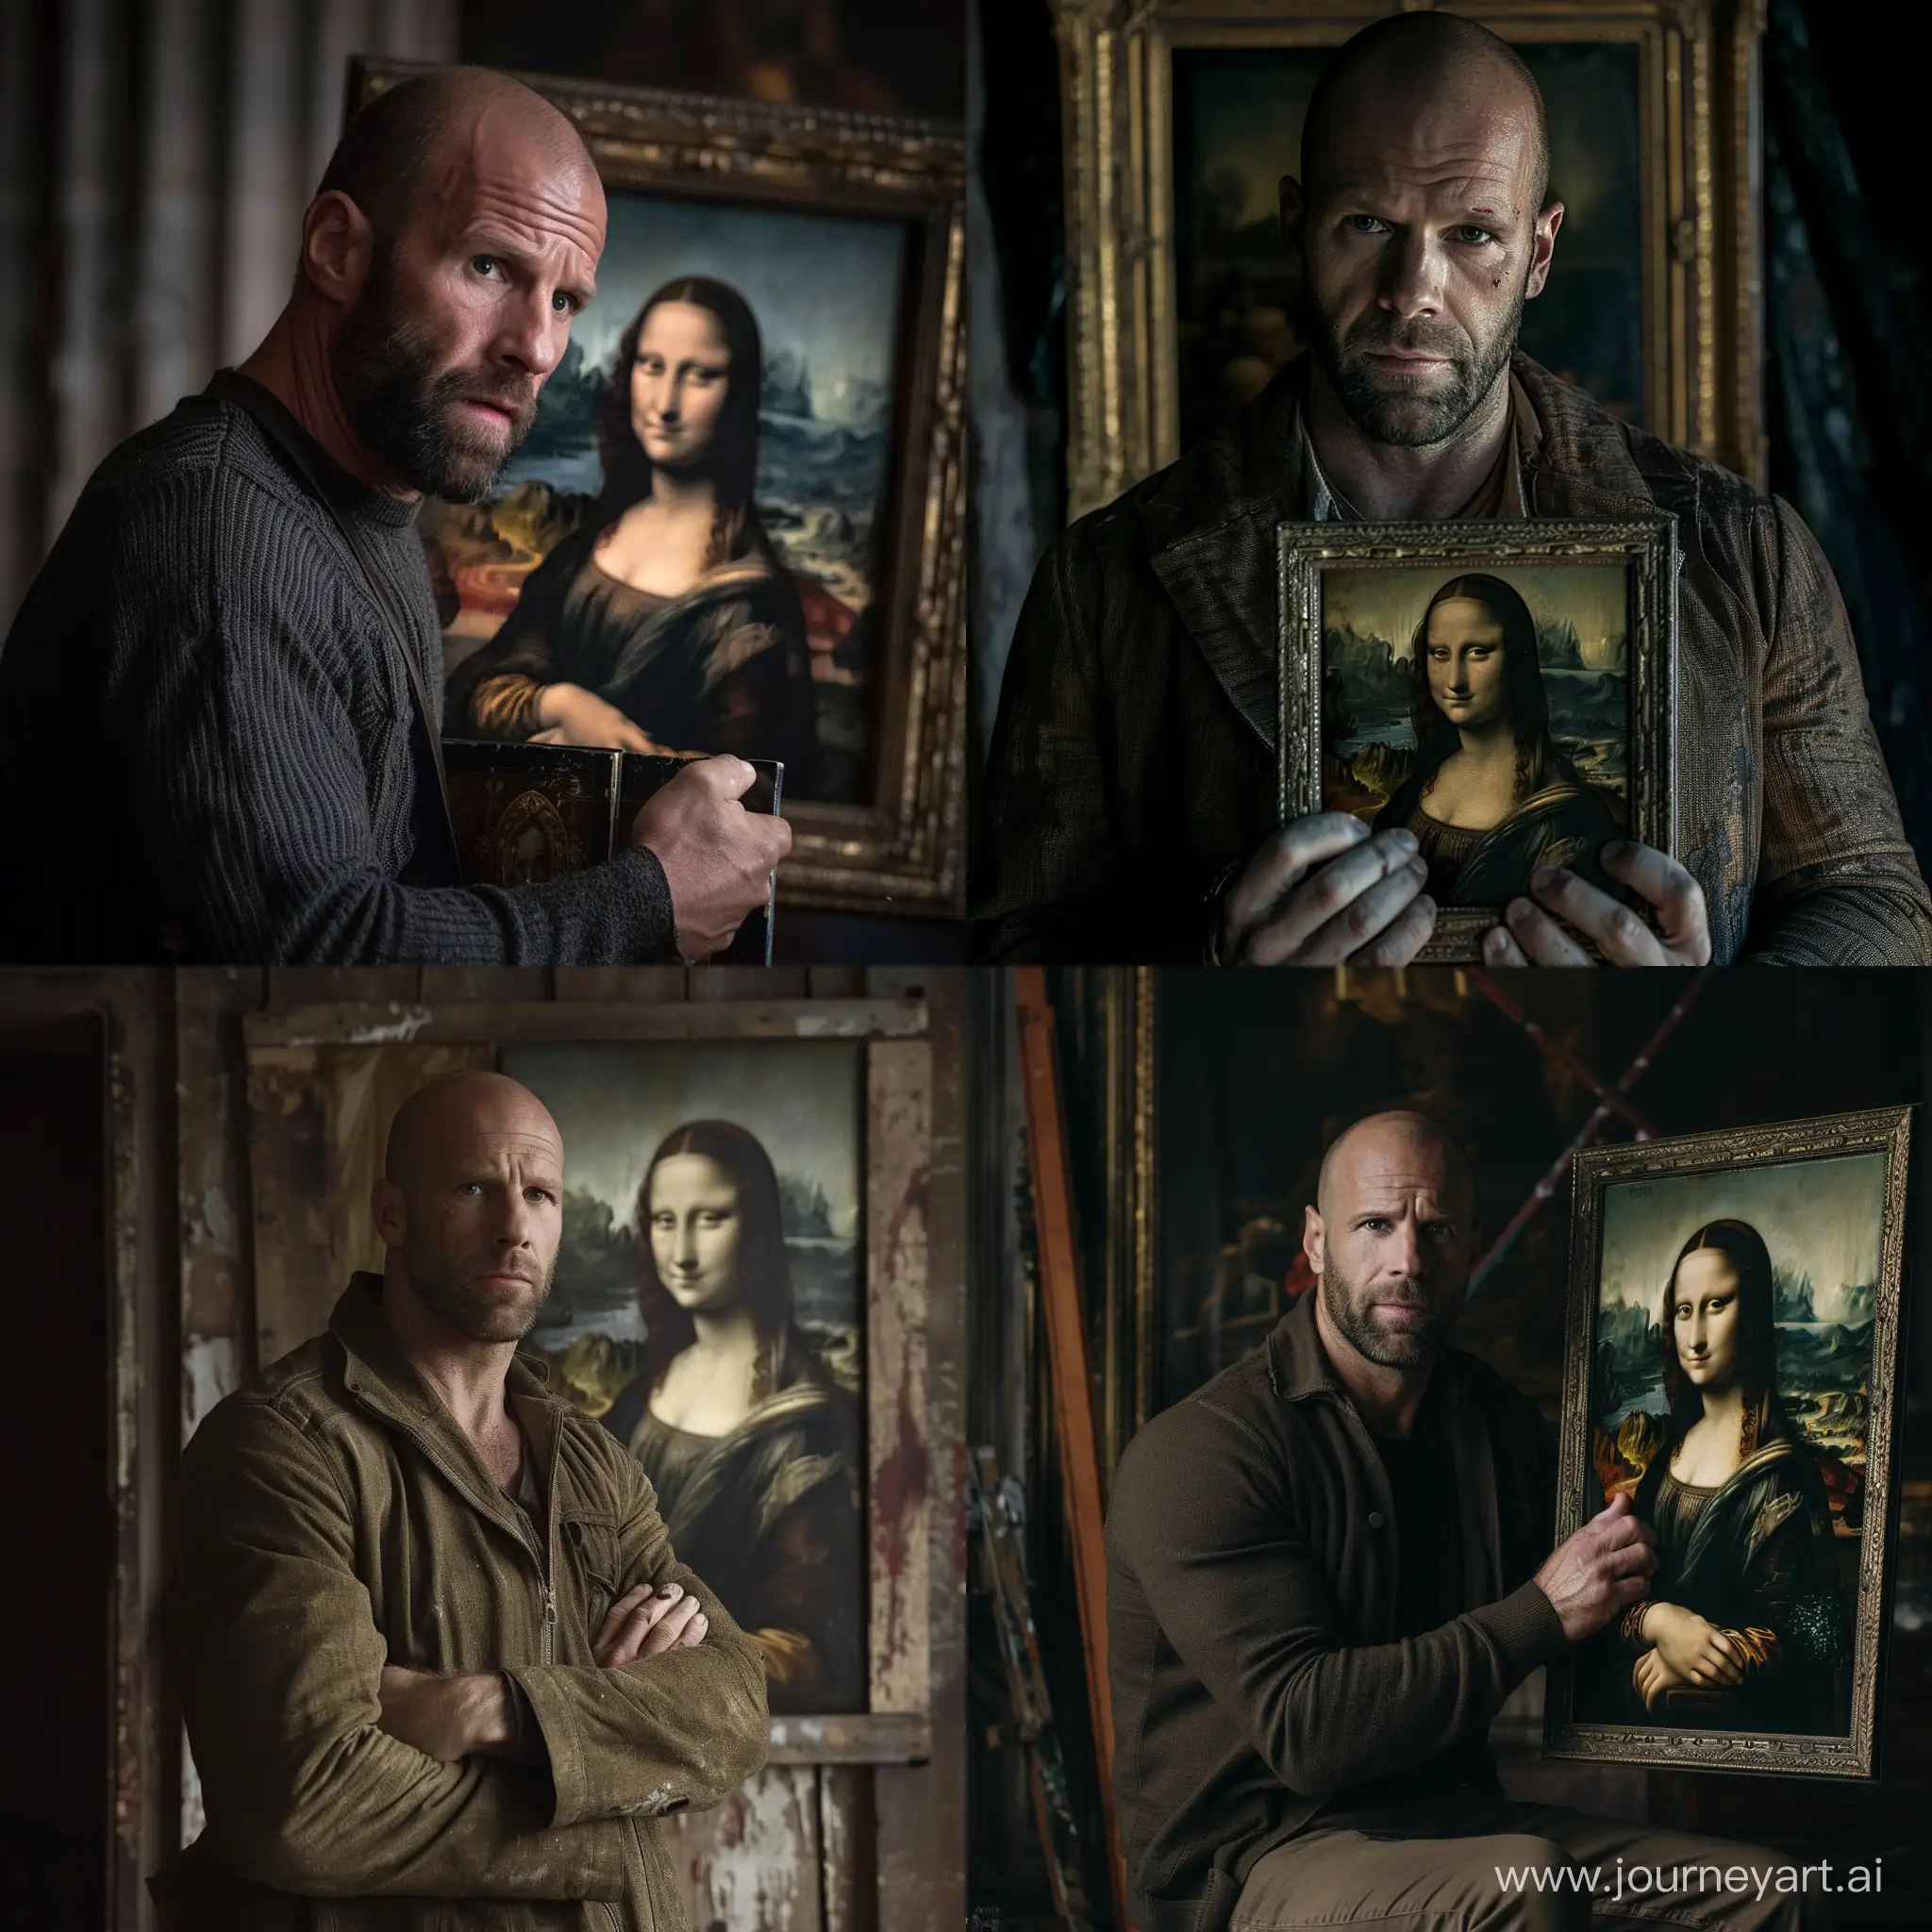 Jason-Statham-Escapes-with-Stolen-Mona-Lisa-Painting